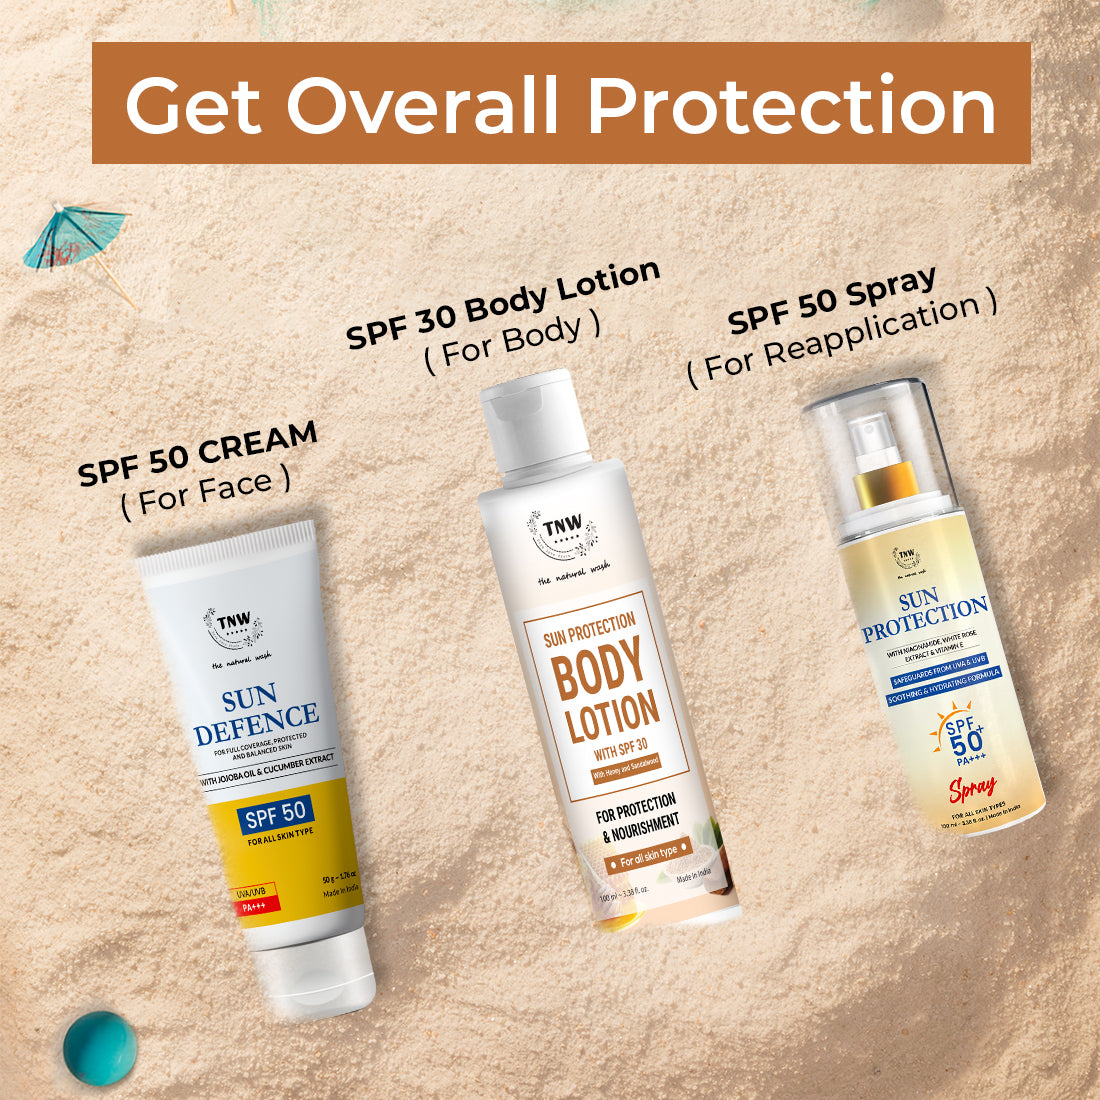 Sun Protection Body Lotion with SPF 30